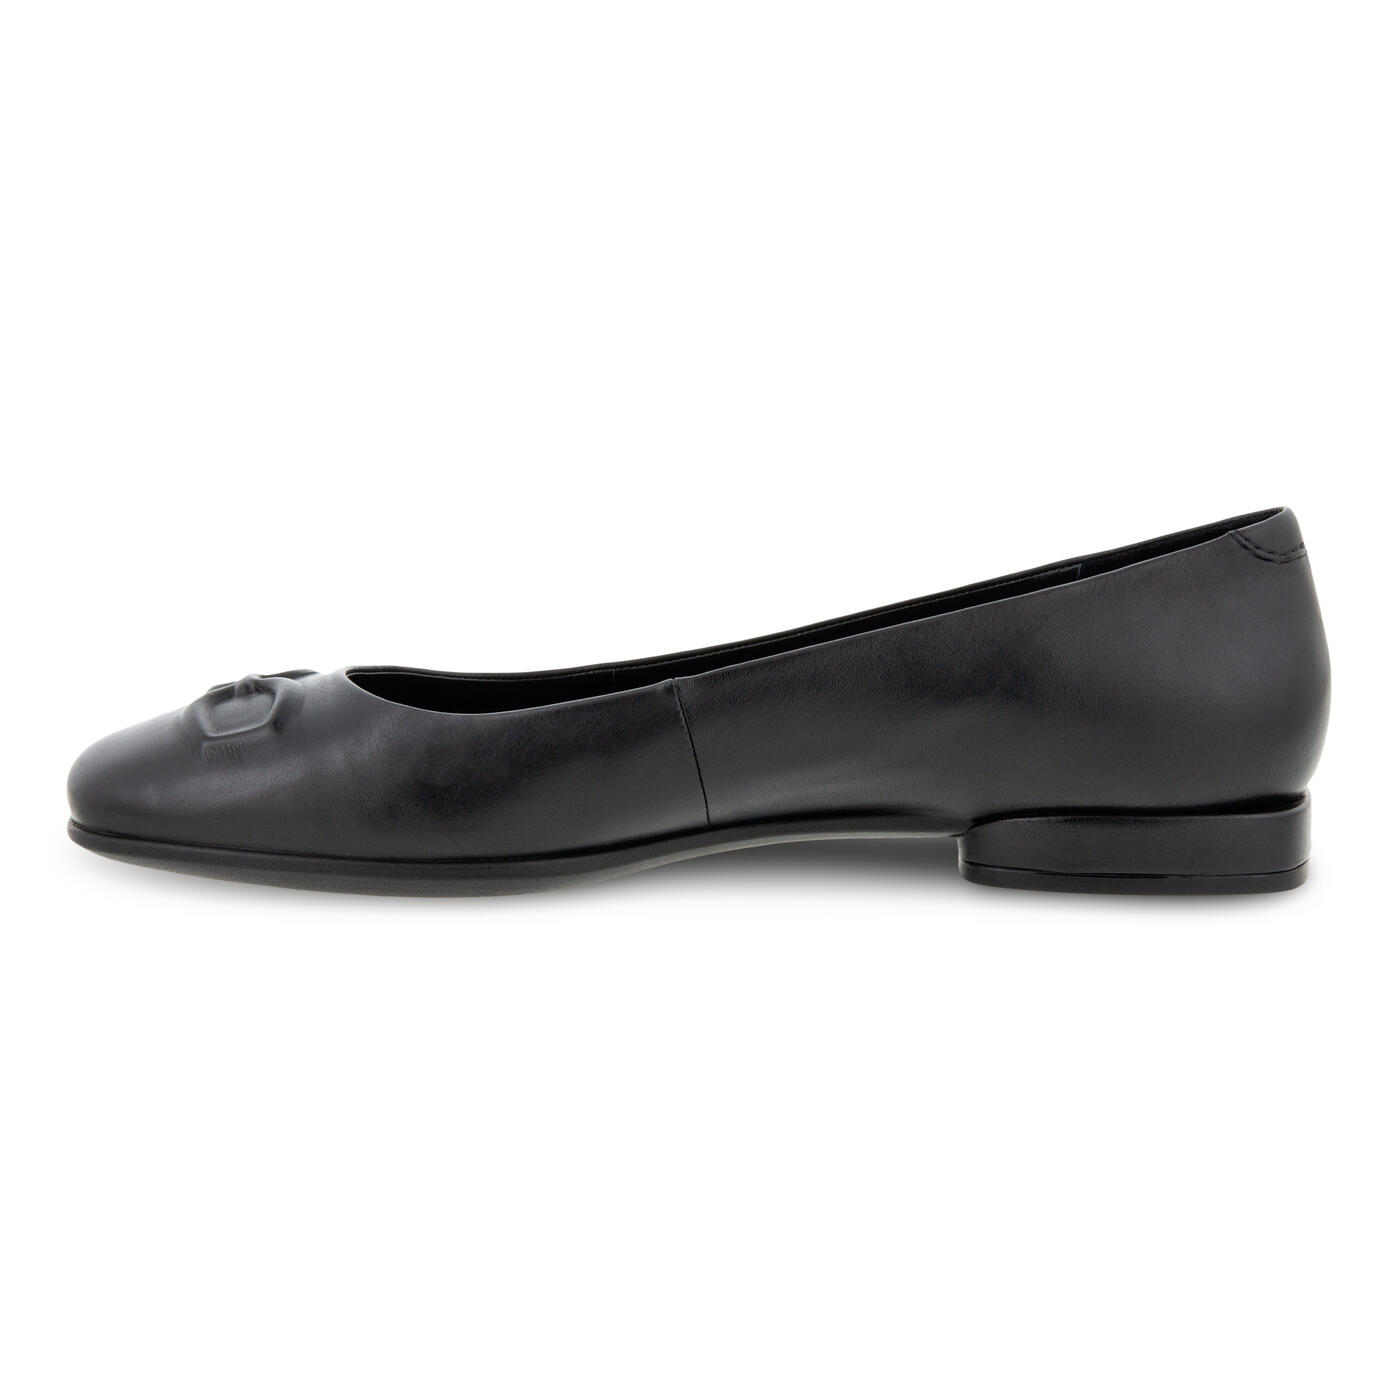 ECCO ANINE SQUARED WOMEN'S BALLERINA SHOES | Official ECCO® Shoes